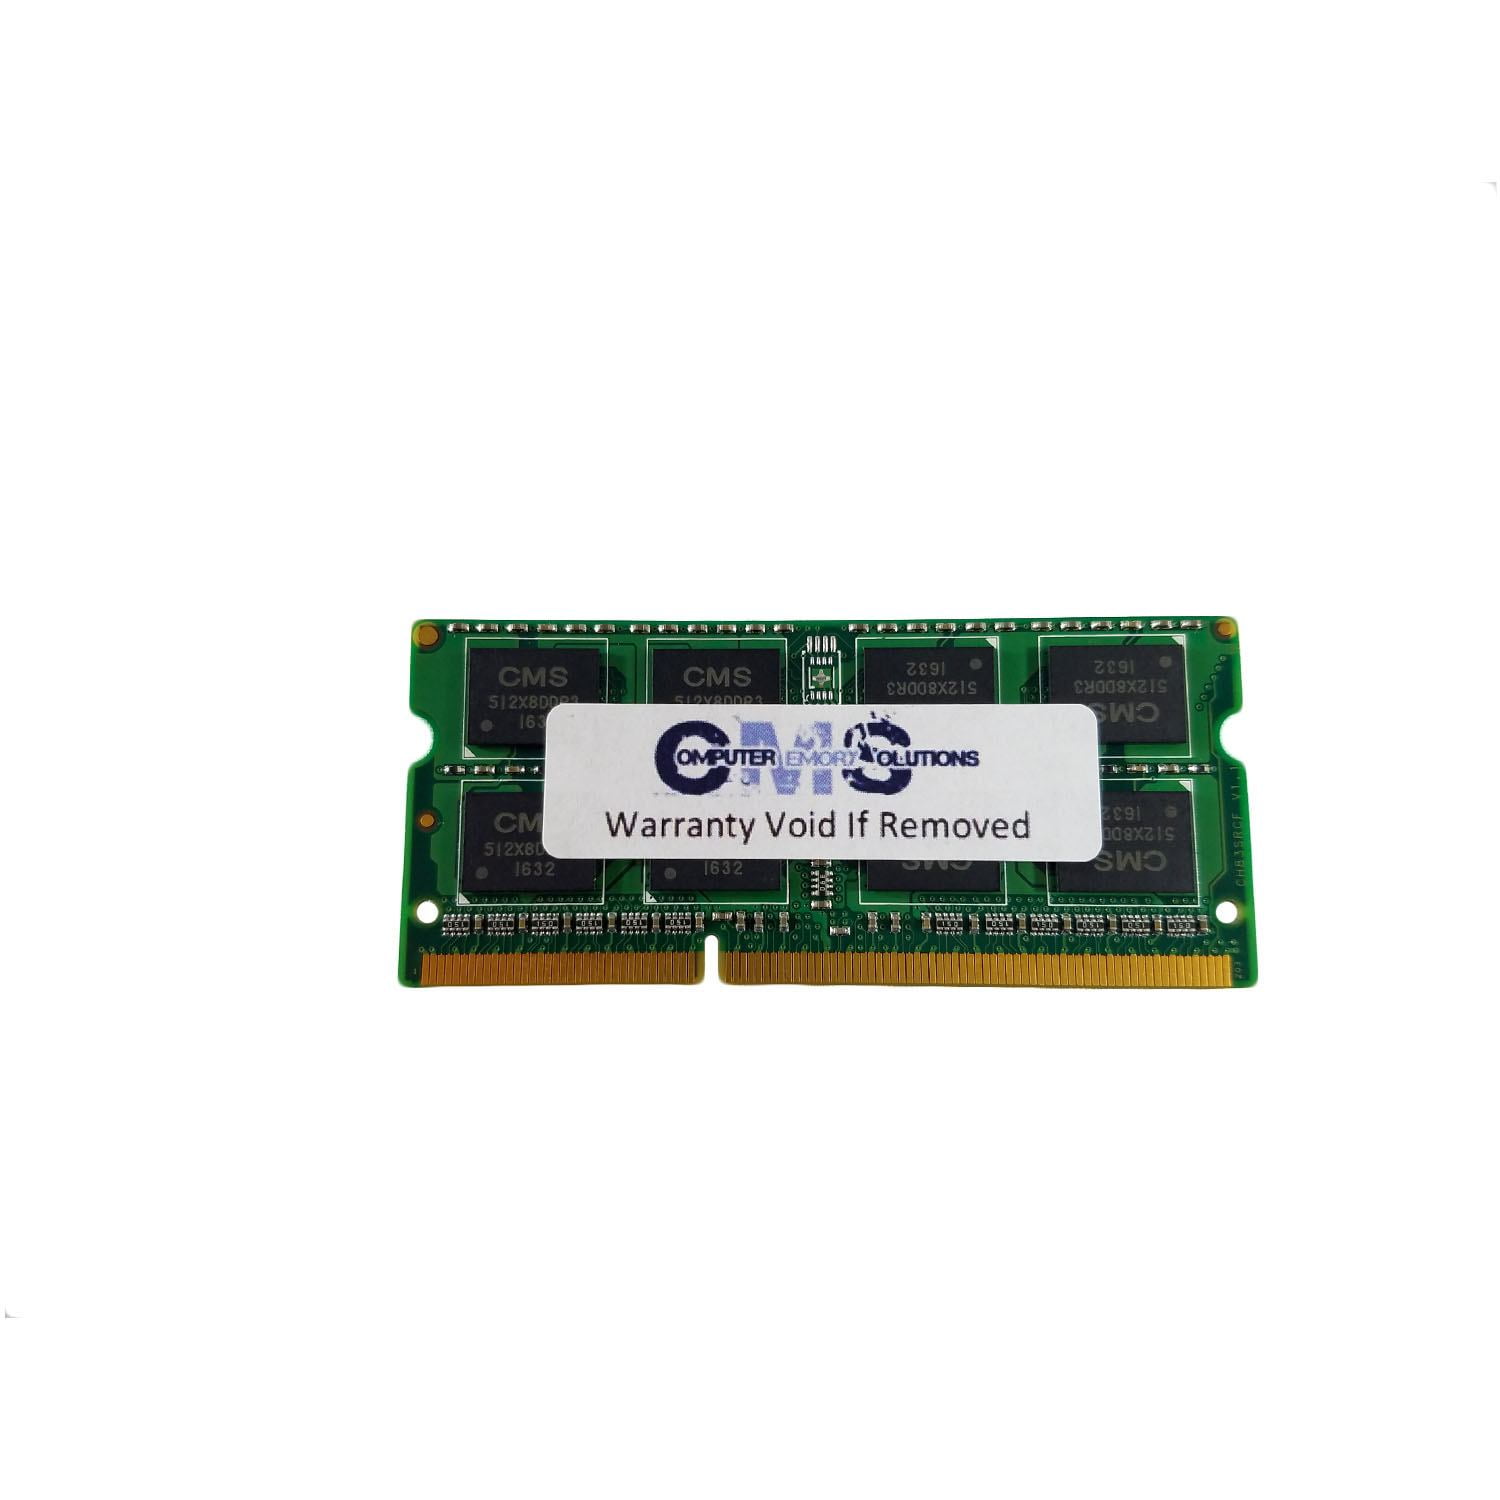 600-1036D Memory Ram Compatible with HP/Compaq Touchsmart 600-1031D 600-1037D by CMS A30 1X4GB 4GB